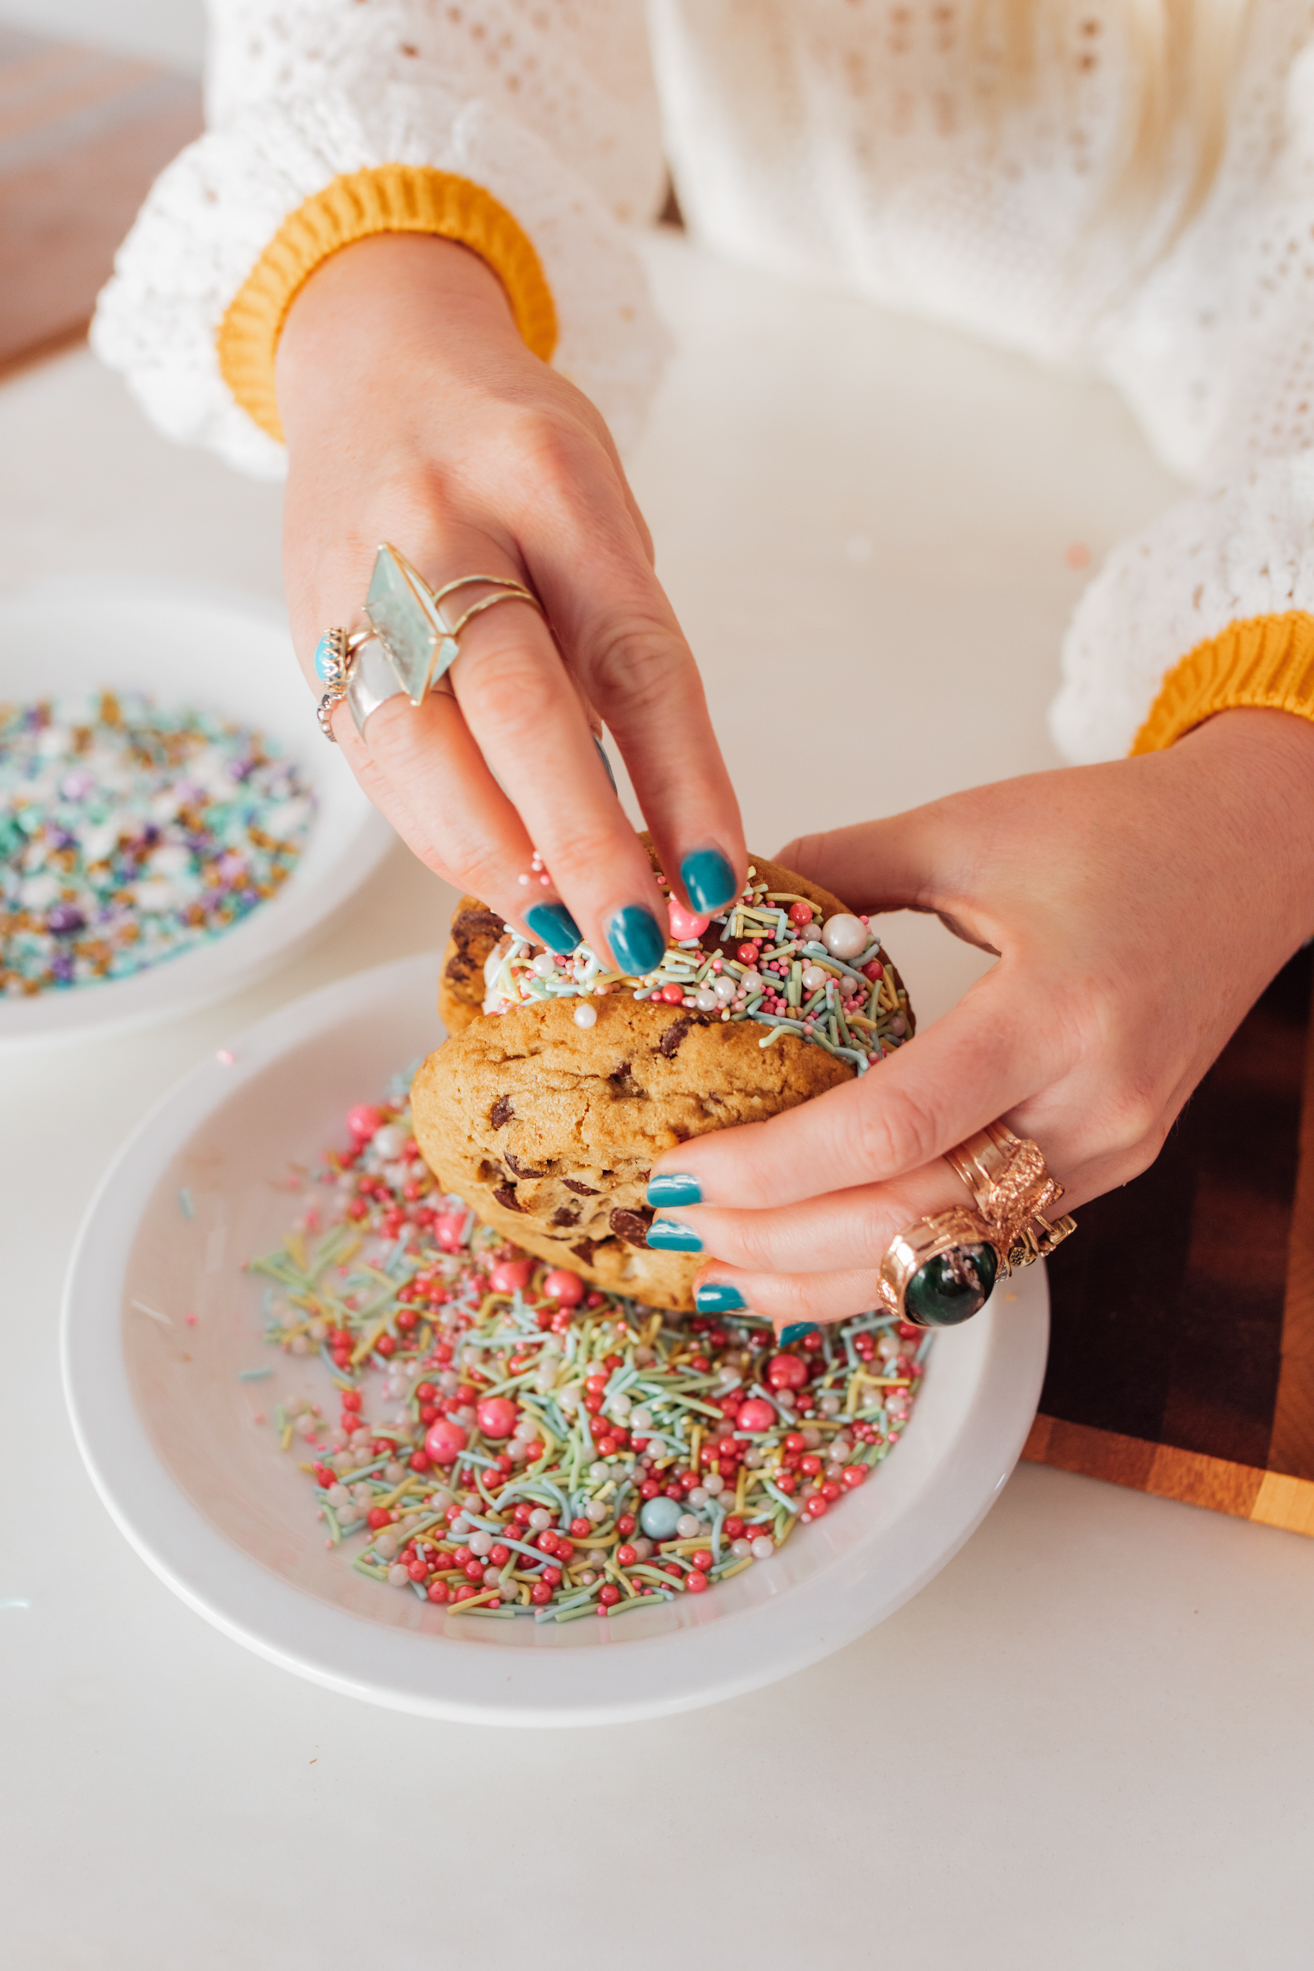 decorating ice cream sandwich with sprinkles